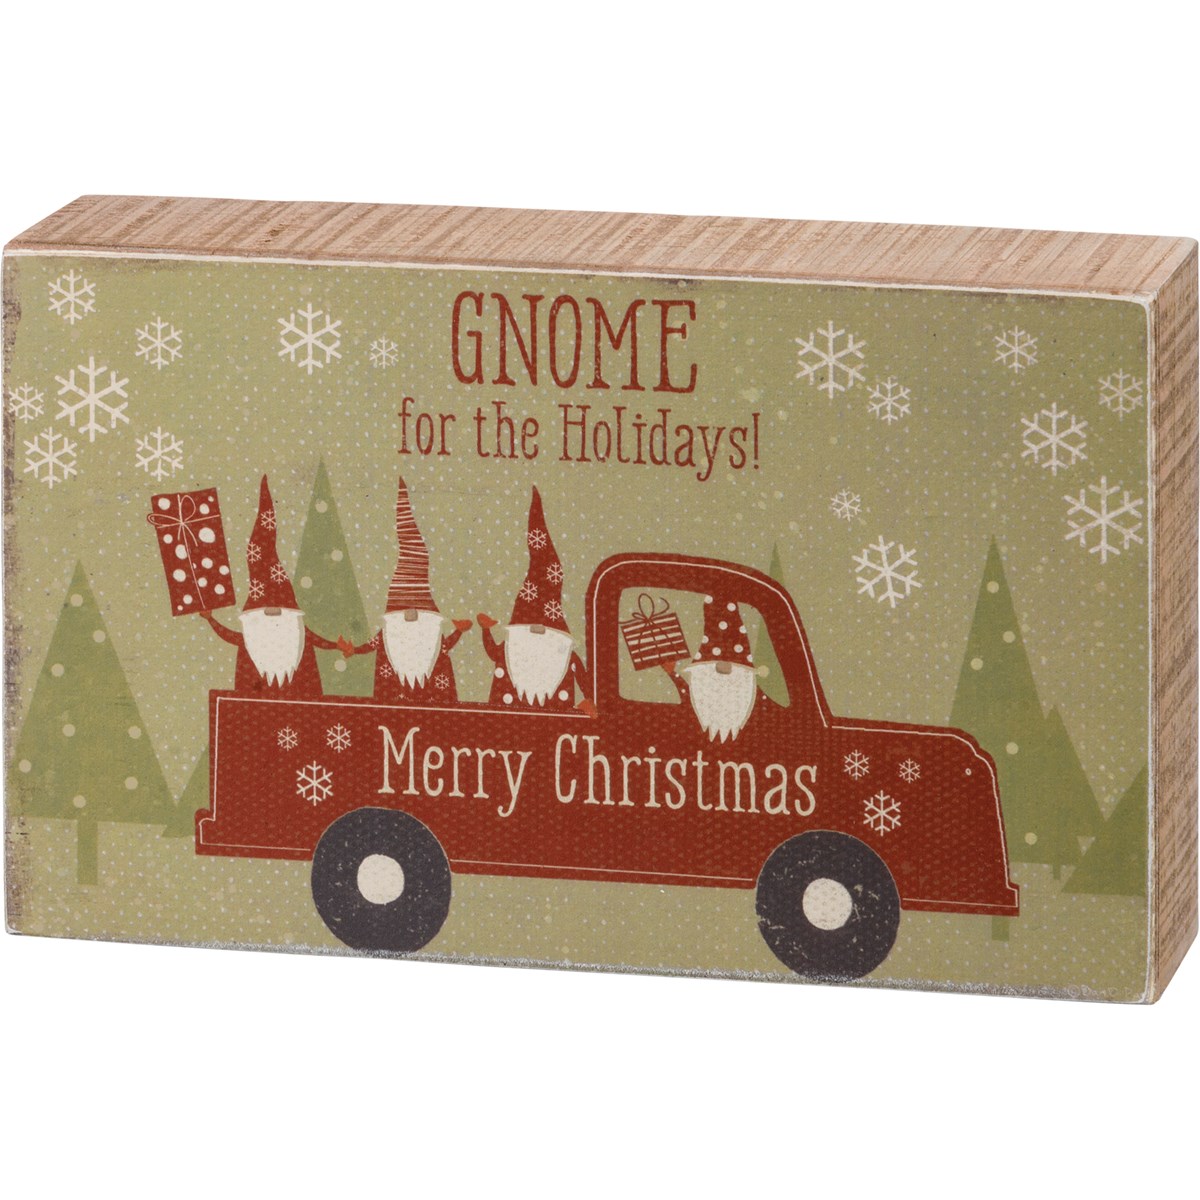 Gnome For The Holidays Box Sign - Wood, Paper